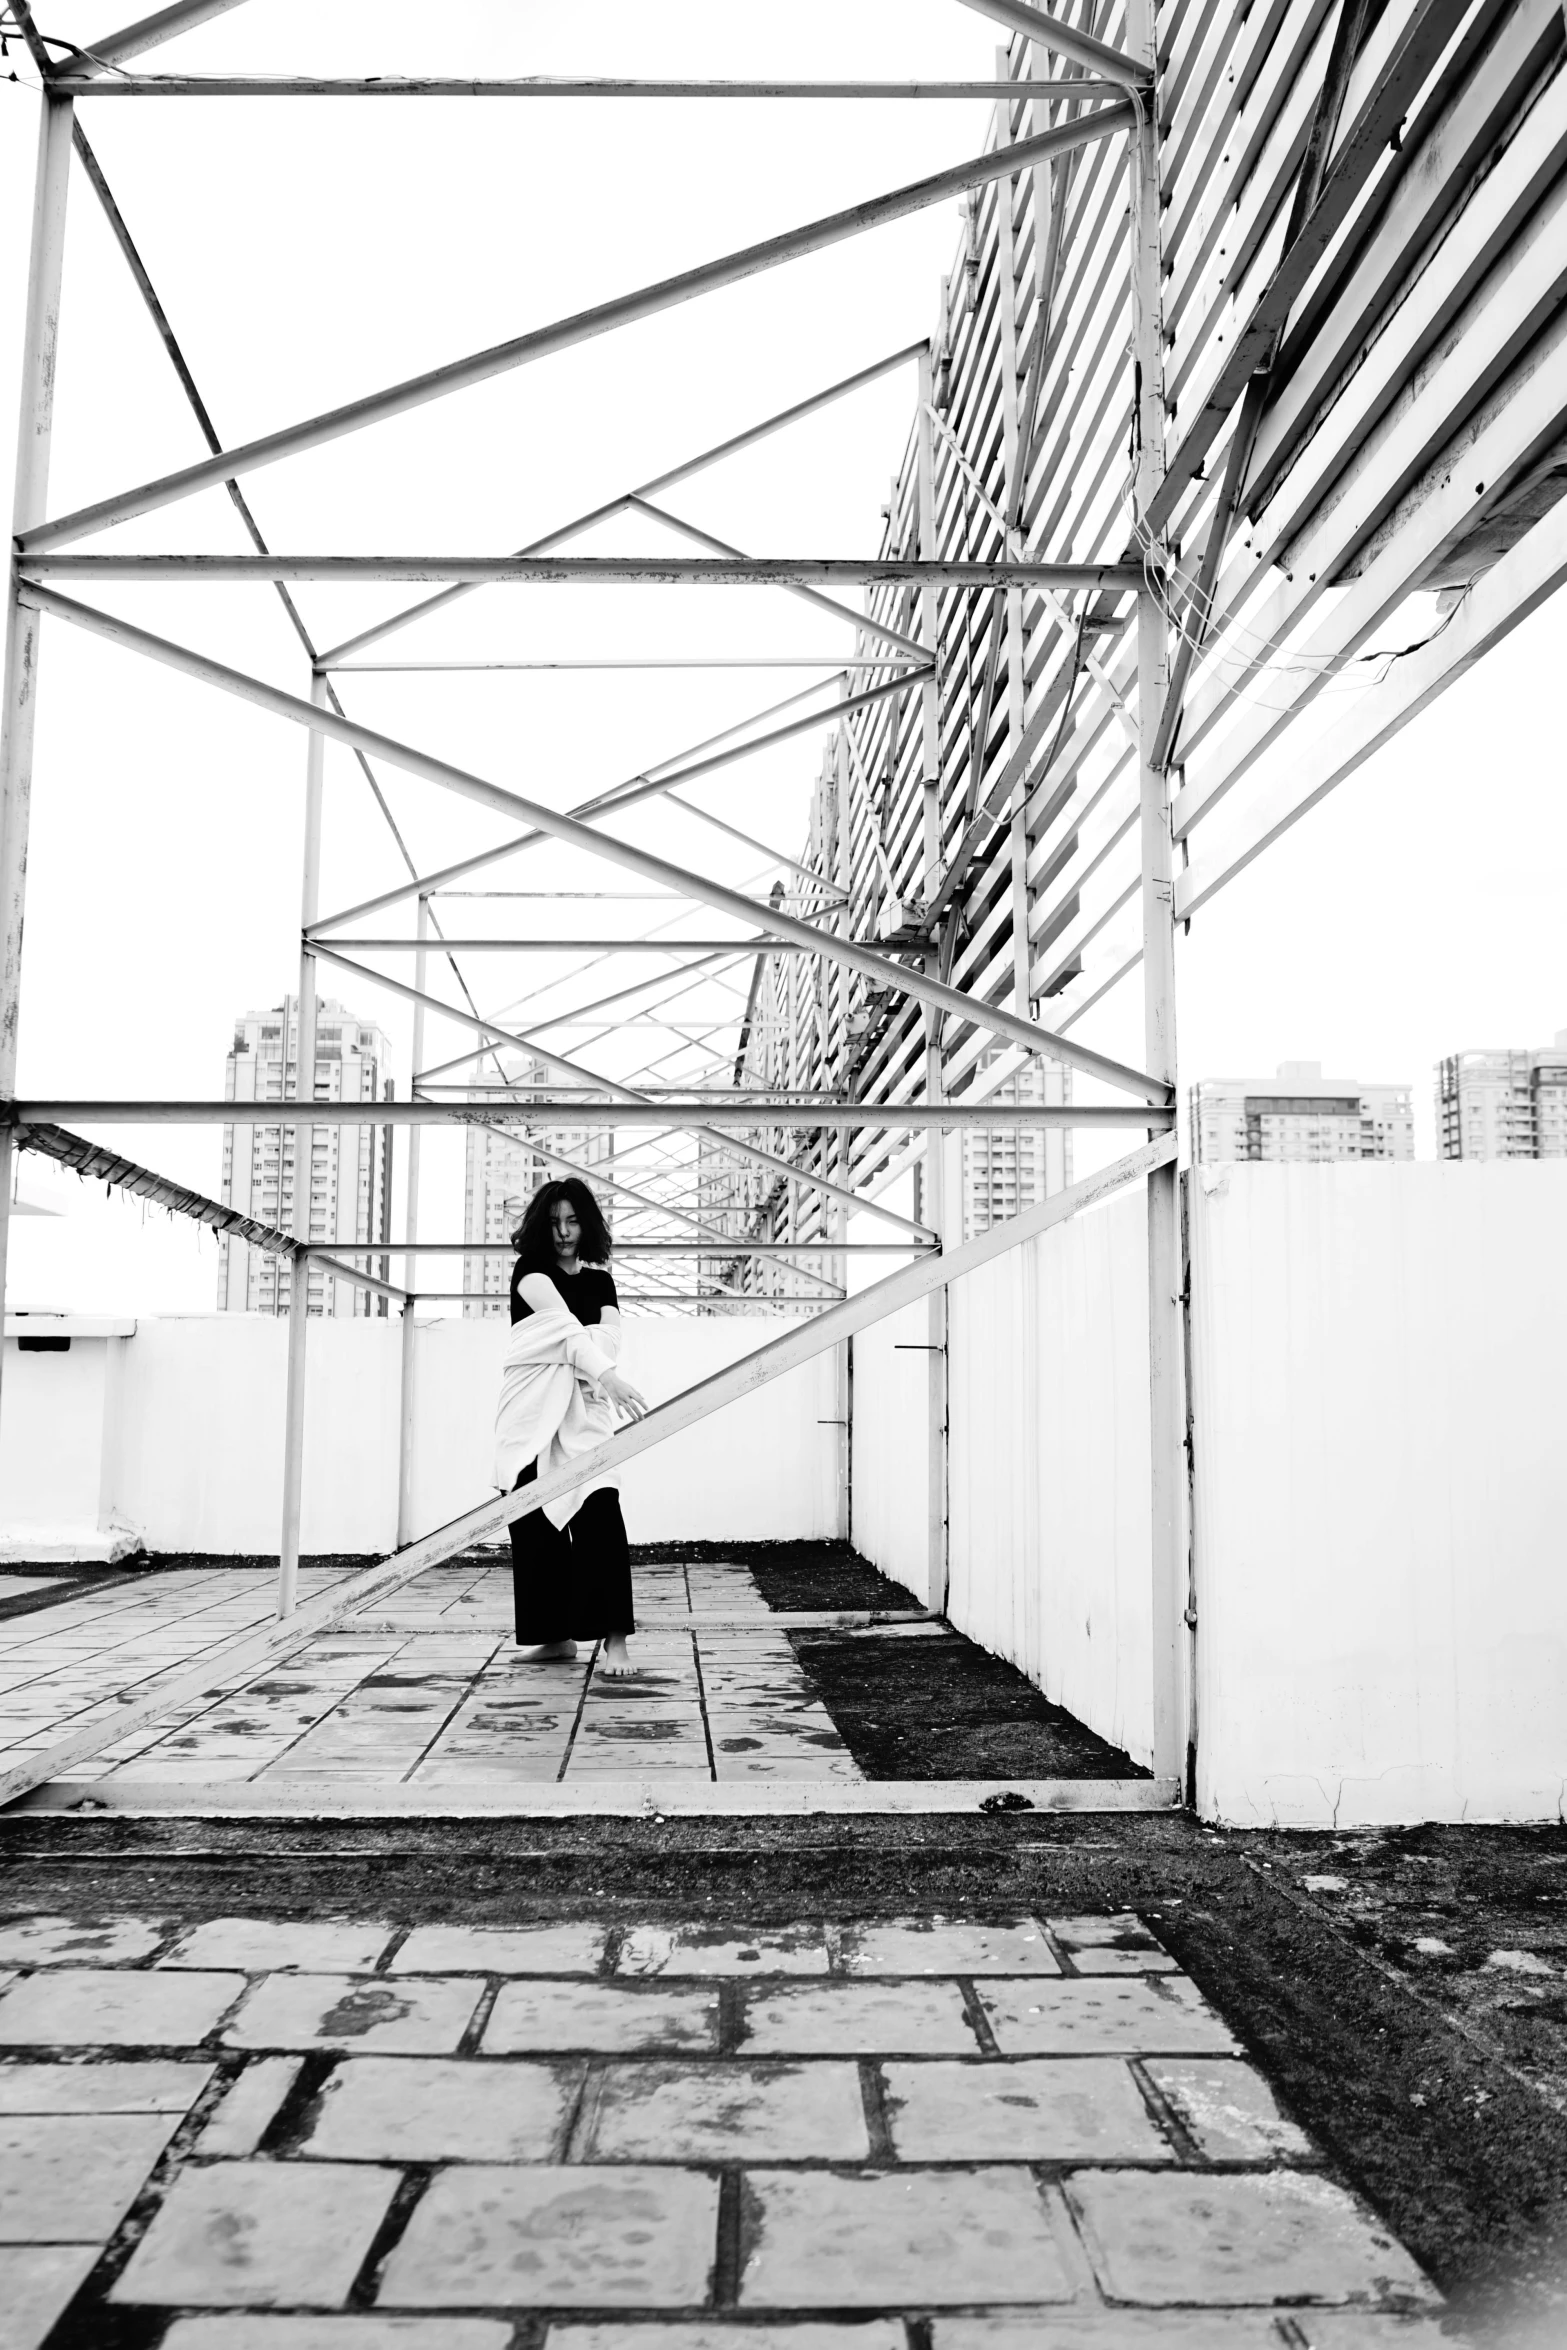 a black and white photo of a woman walking down a walkway, inspired by Cheng Jiasui, conceptual art, rooftop party, ameera al-taweel, low quality photo, square